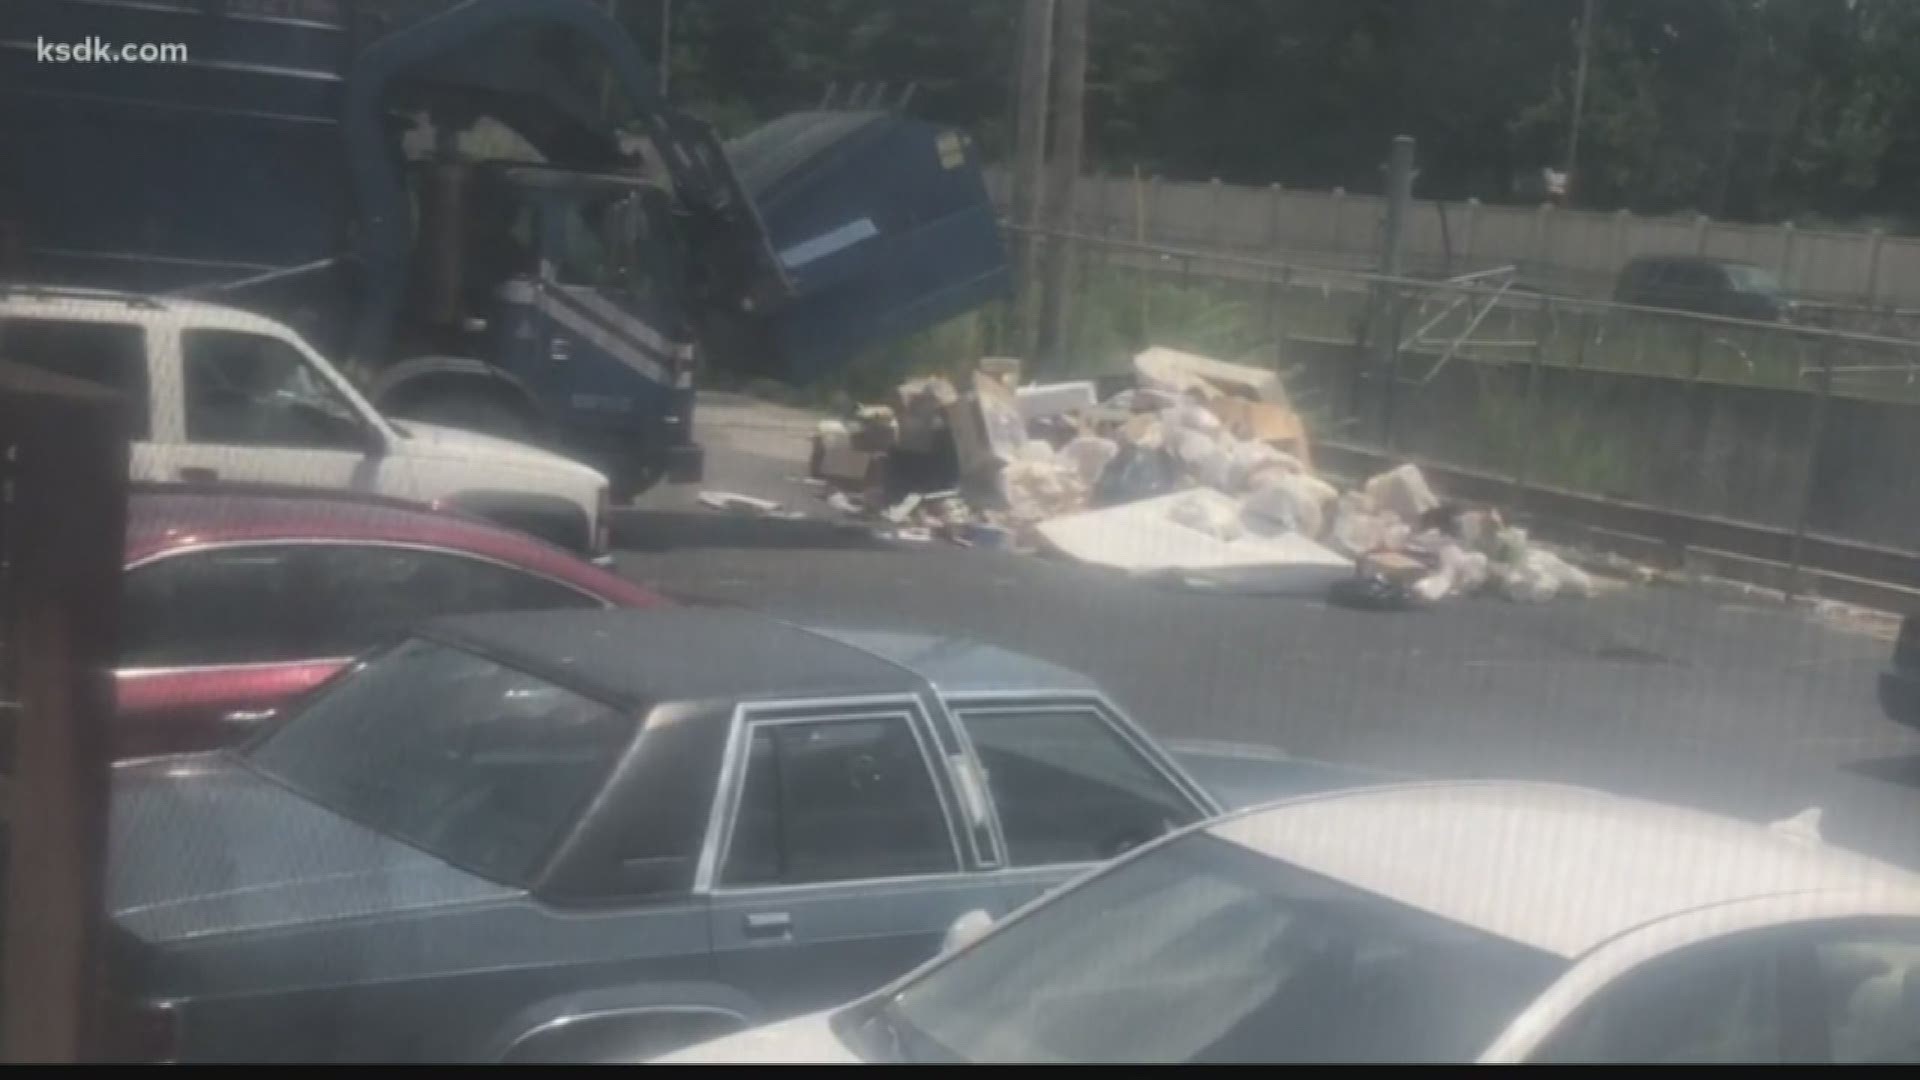 Max Harris said she loves her apartment in Dabaliviere Place, right next to Central West End. But she shares a parking lot with a row of housing and their trash has been piling up in the parking lot.